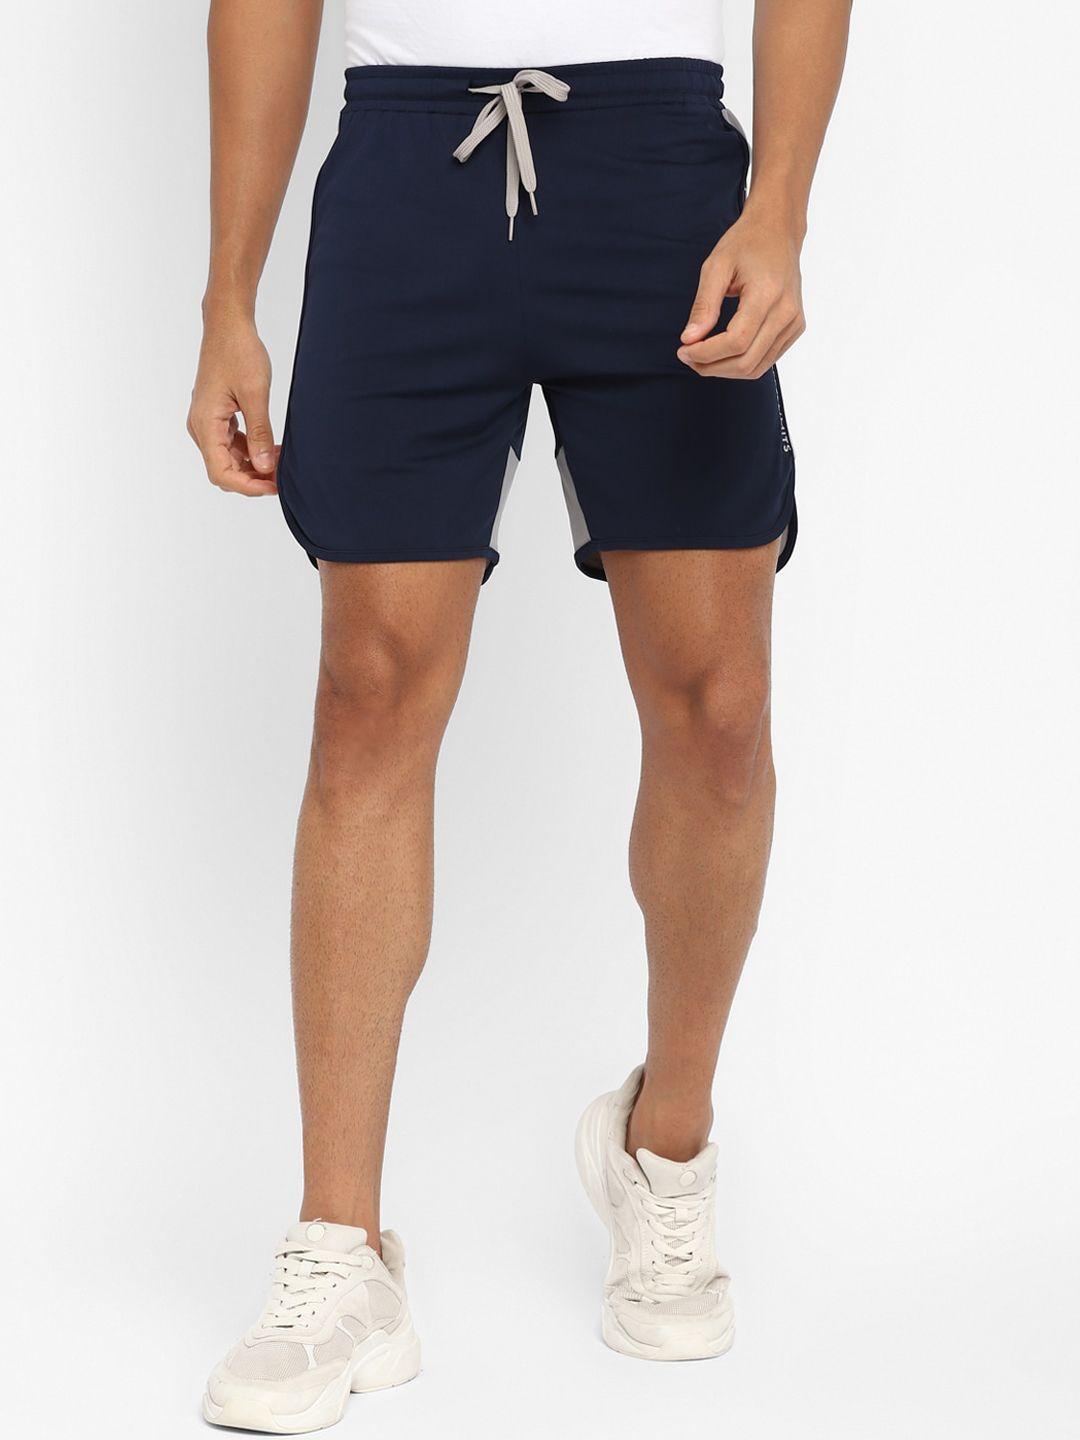 off-limits-men-navy-blue-training-or-gym-shorts